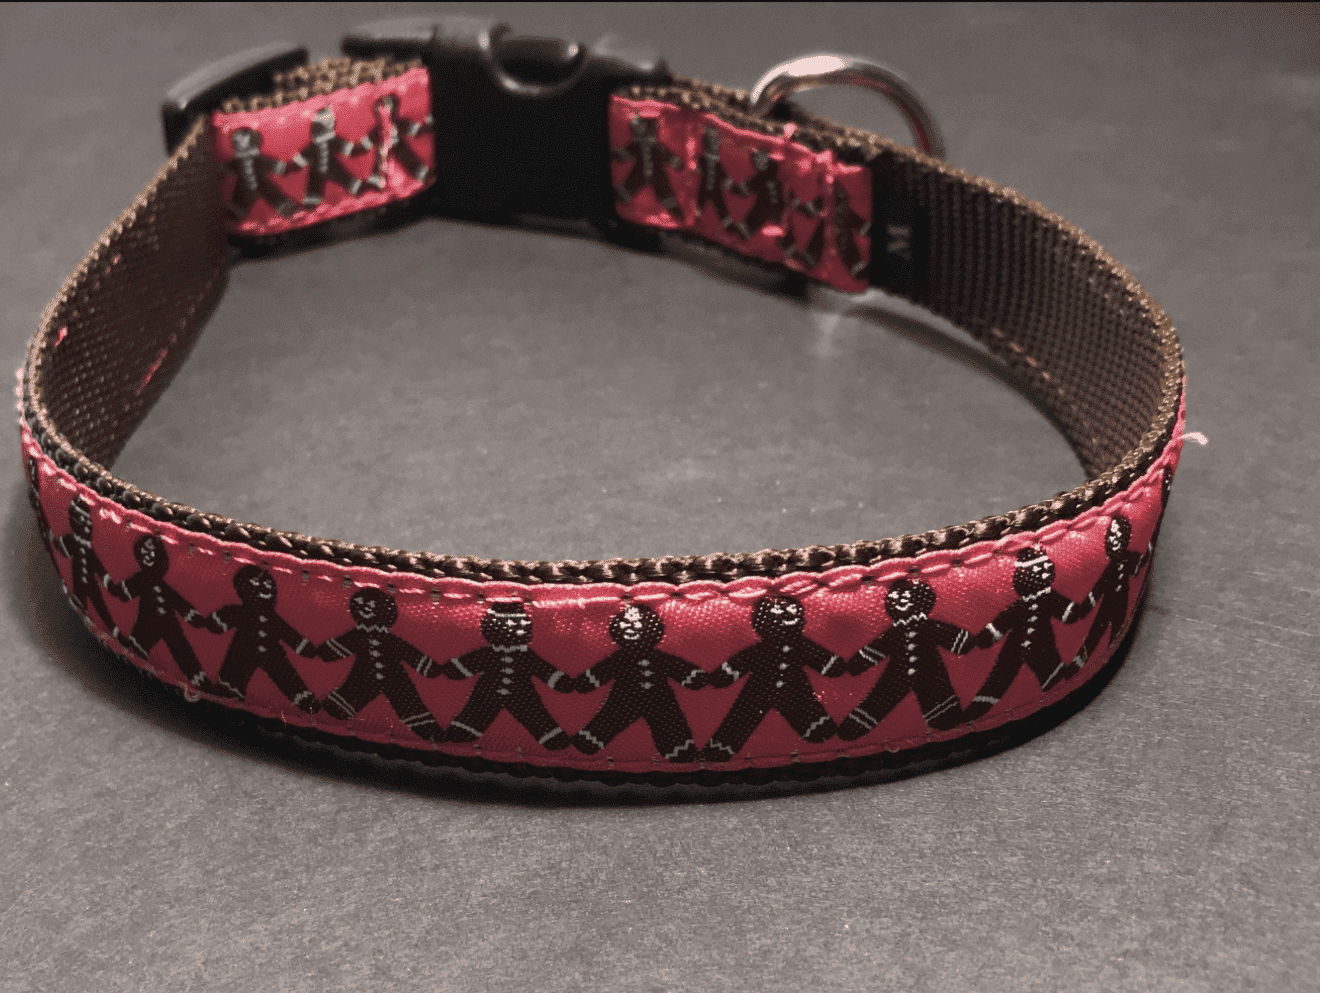 The Ginger Bread Man Dog Collars or Leads (1" Wide).